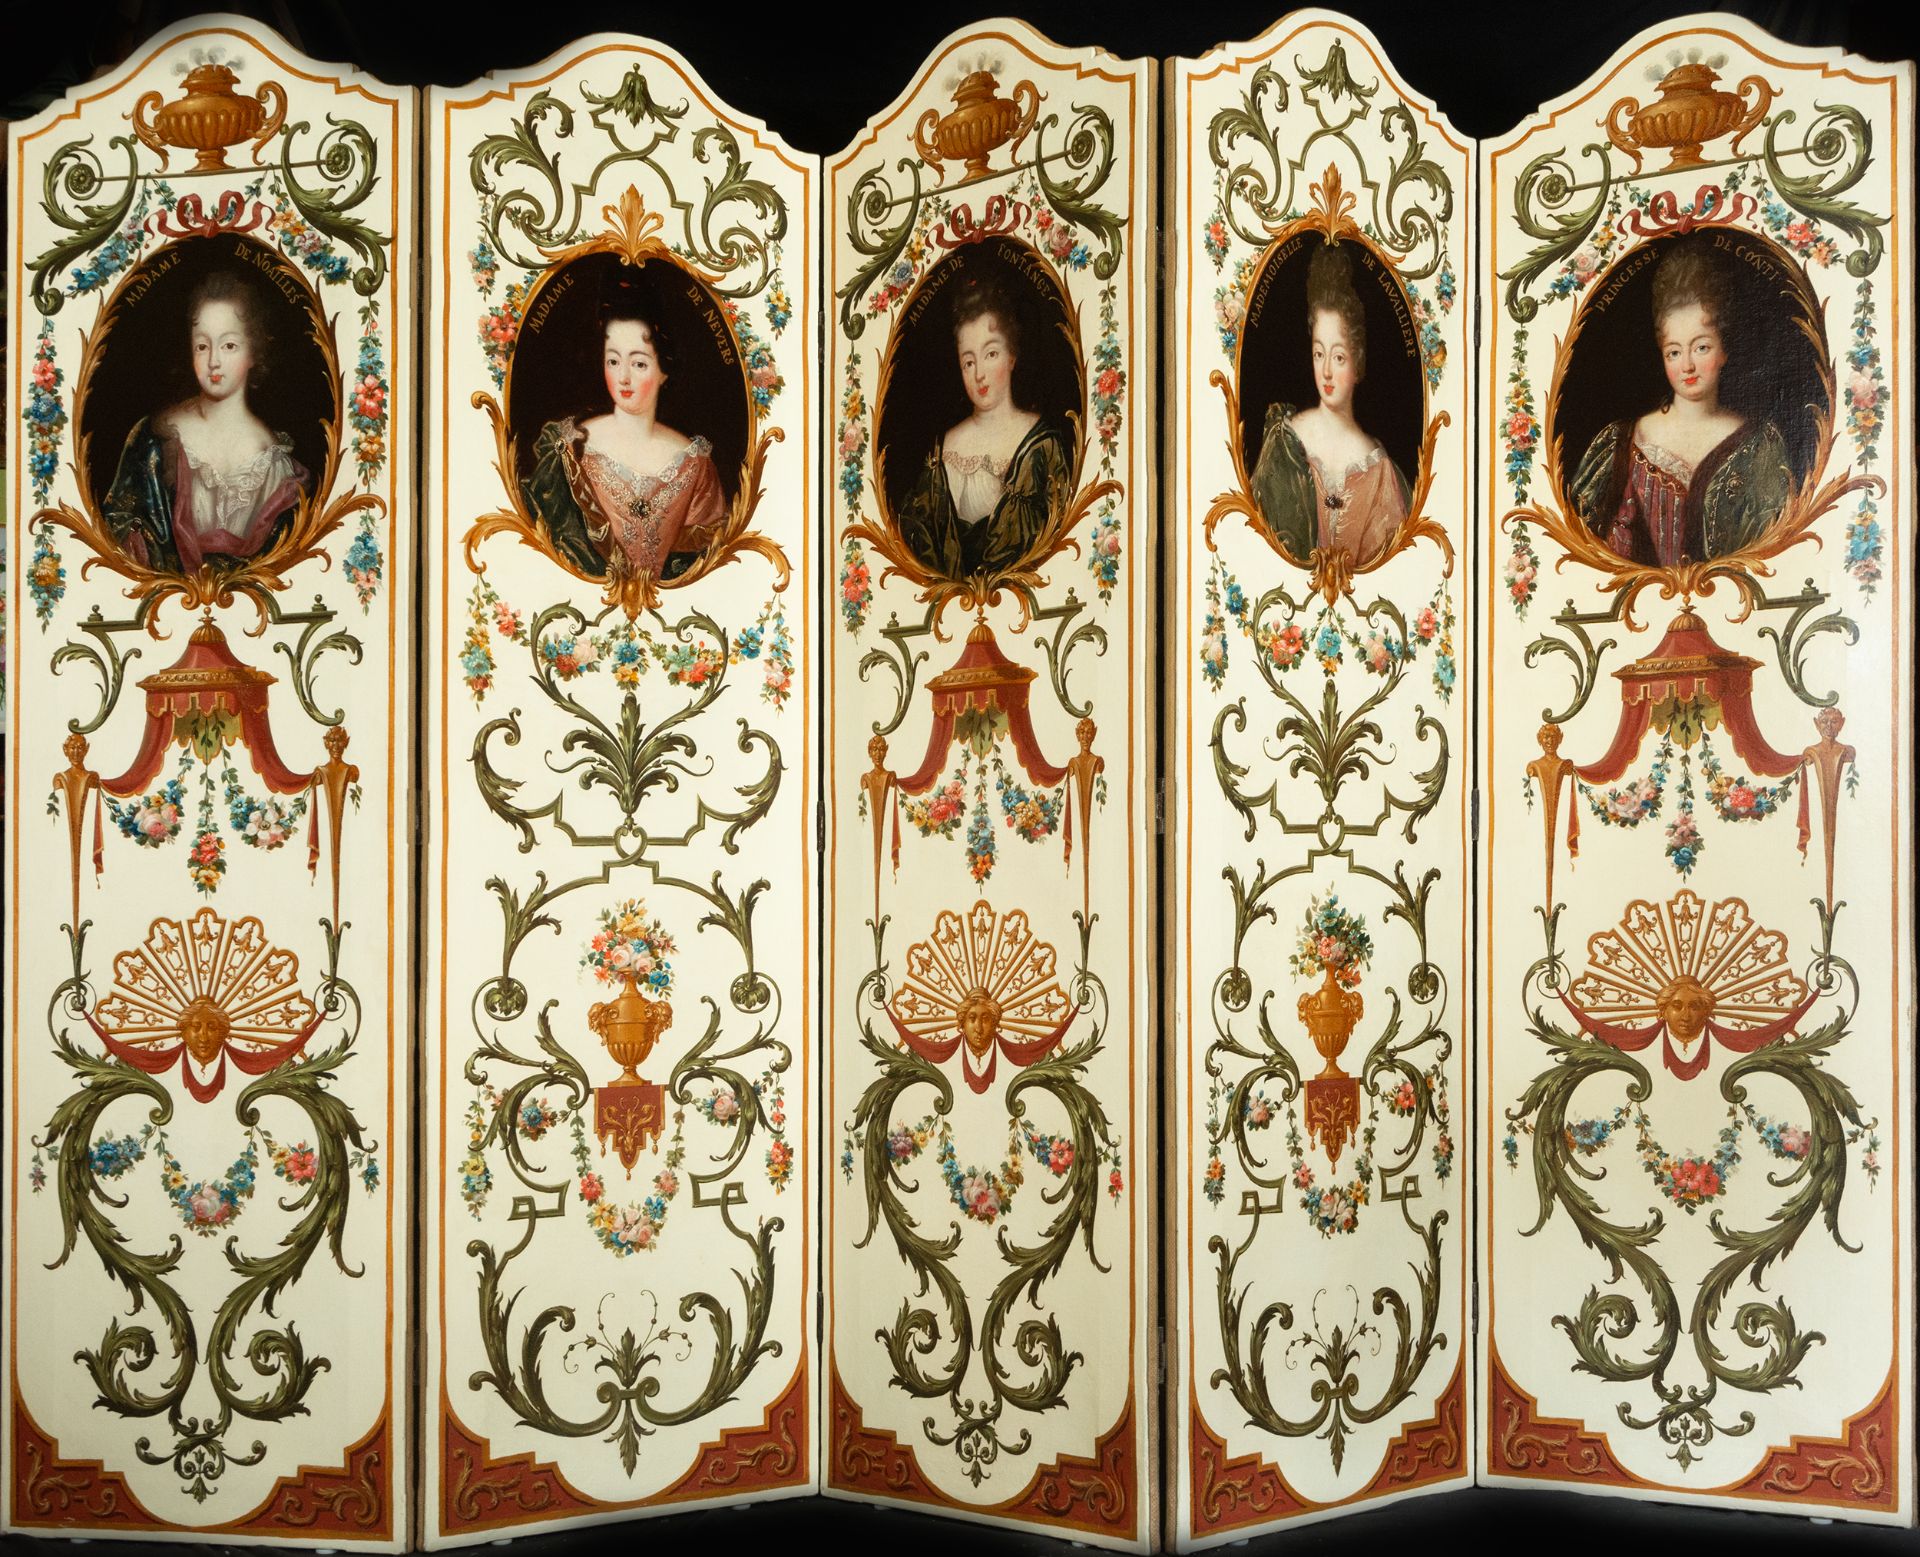 Exceptional Lot of 5 Panels for Boiserie painted on canvas and mounted on Screen, French Work of the